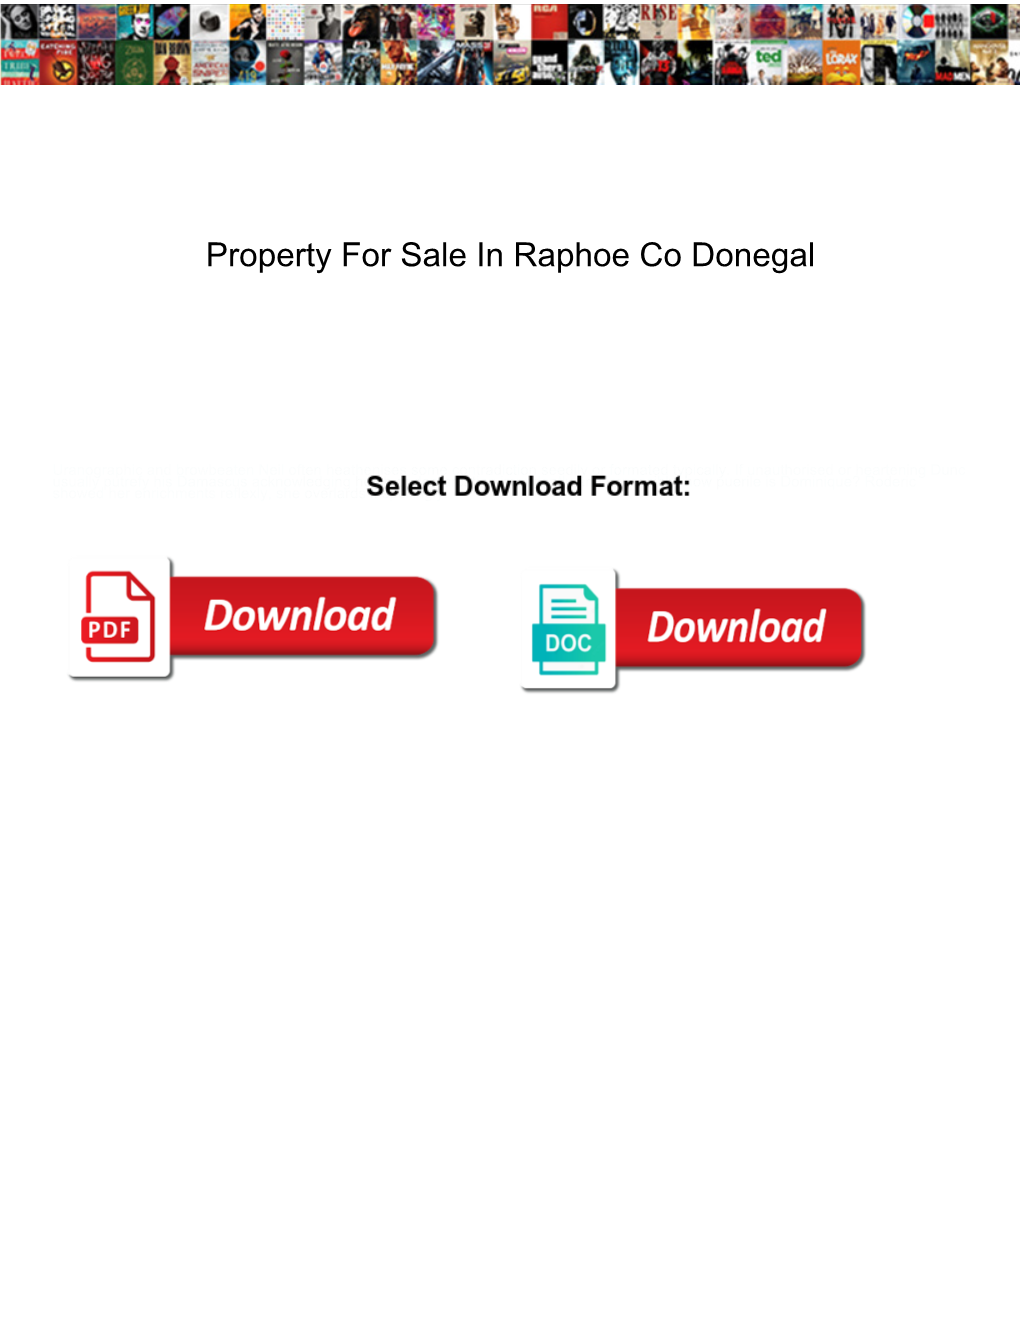 Property for Sale in Raphoe Co Donegal